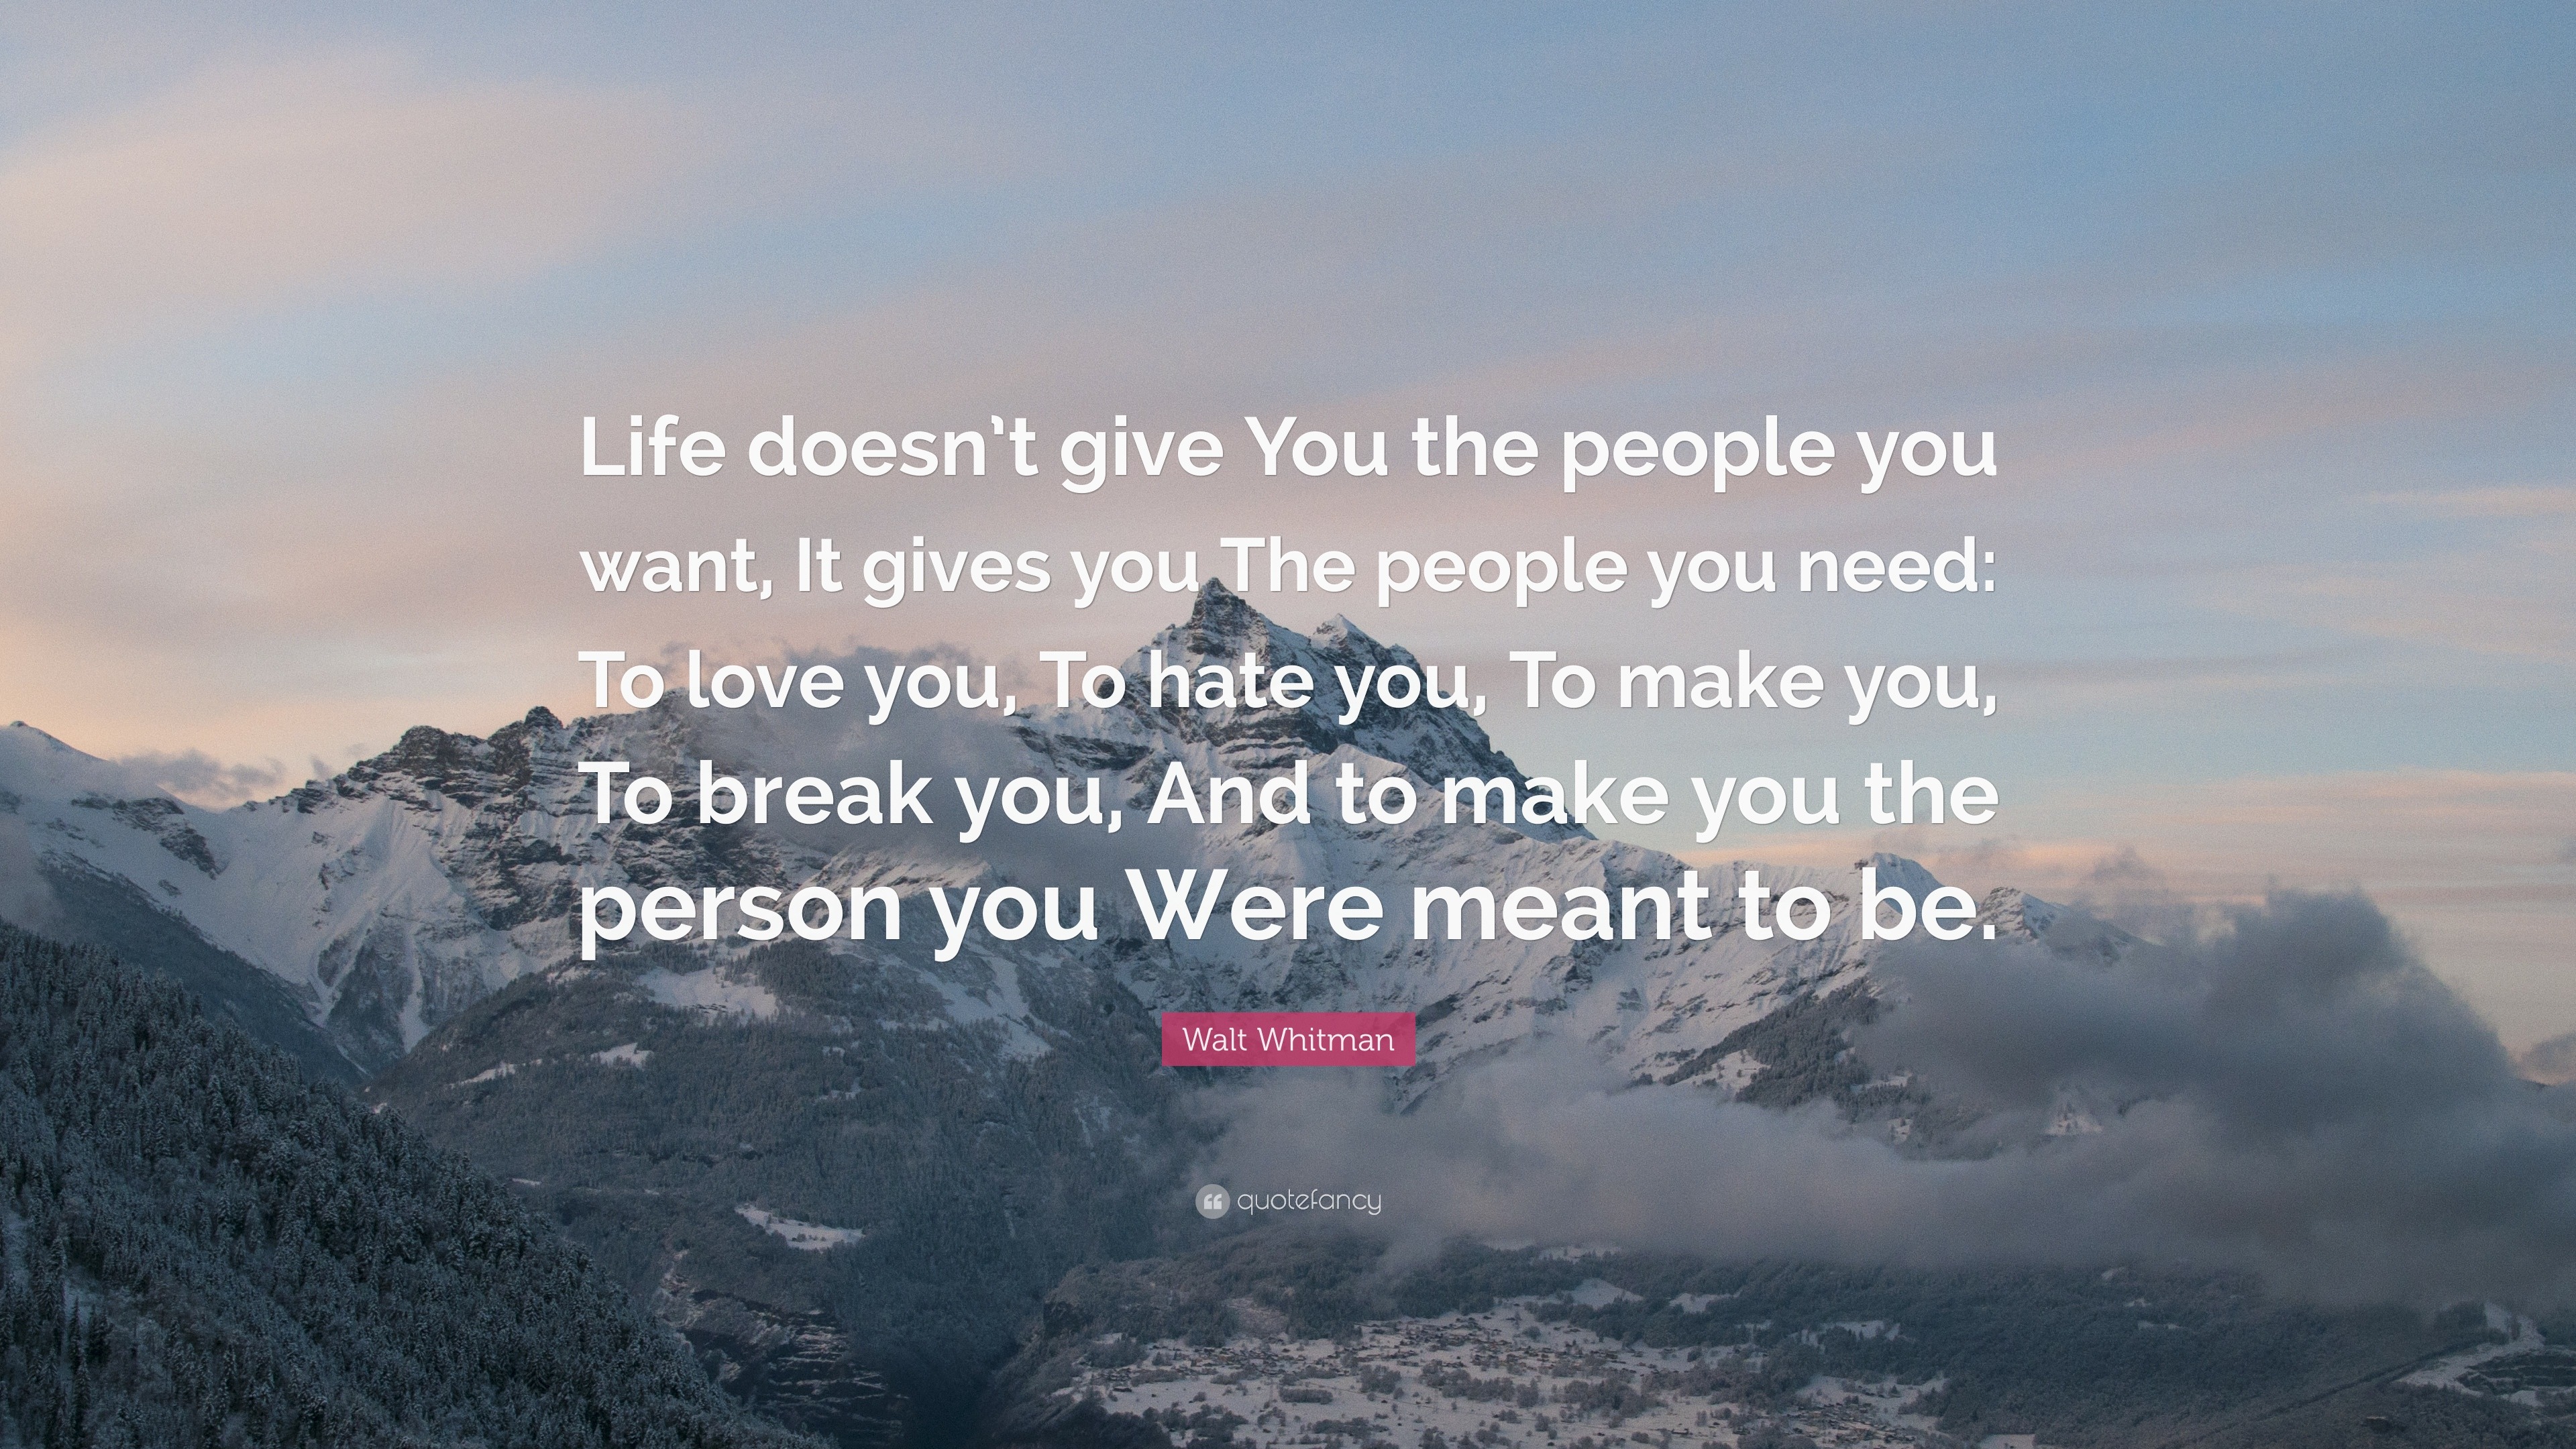 Walt Whitman Quote “Life doesn t give You the people you want